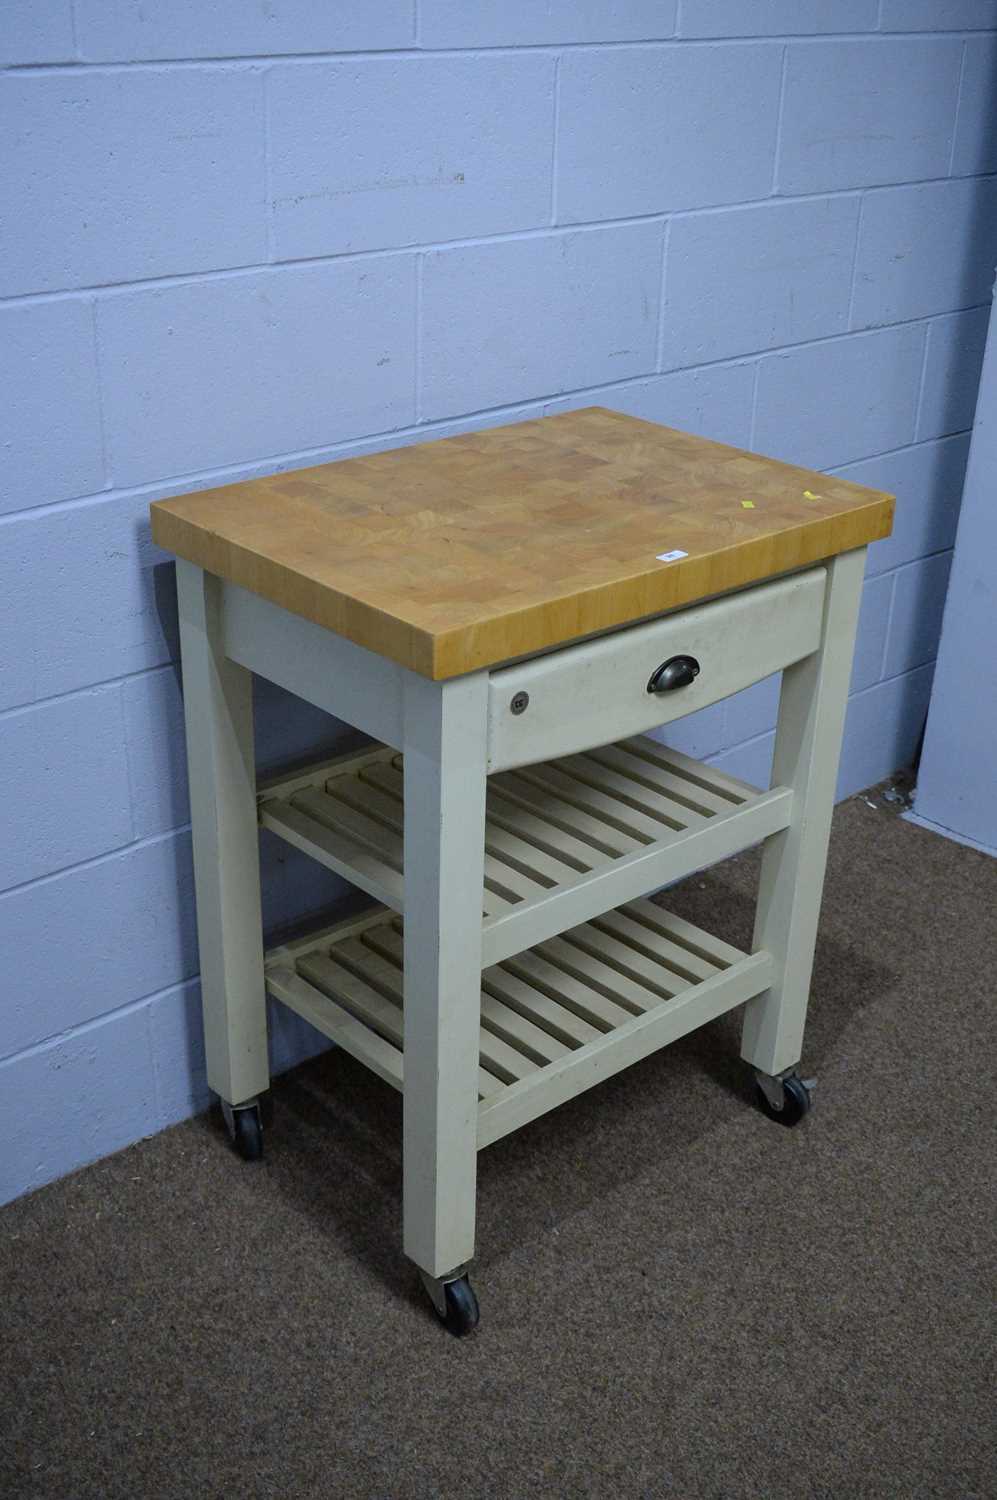 T & G Woodware, Bristol, England: a butcher's style kitchen island. - Image 2 of 7